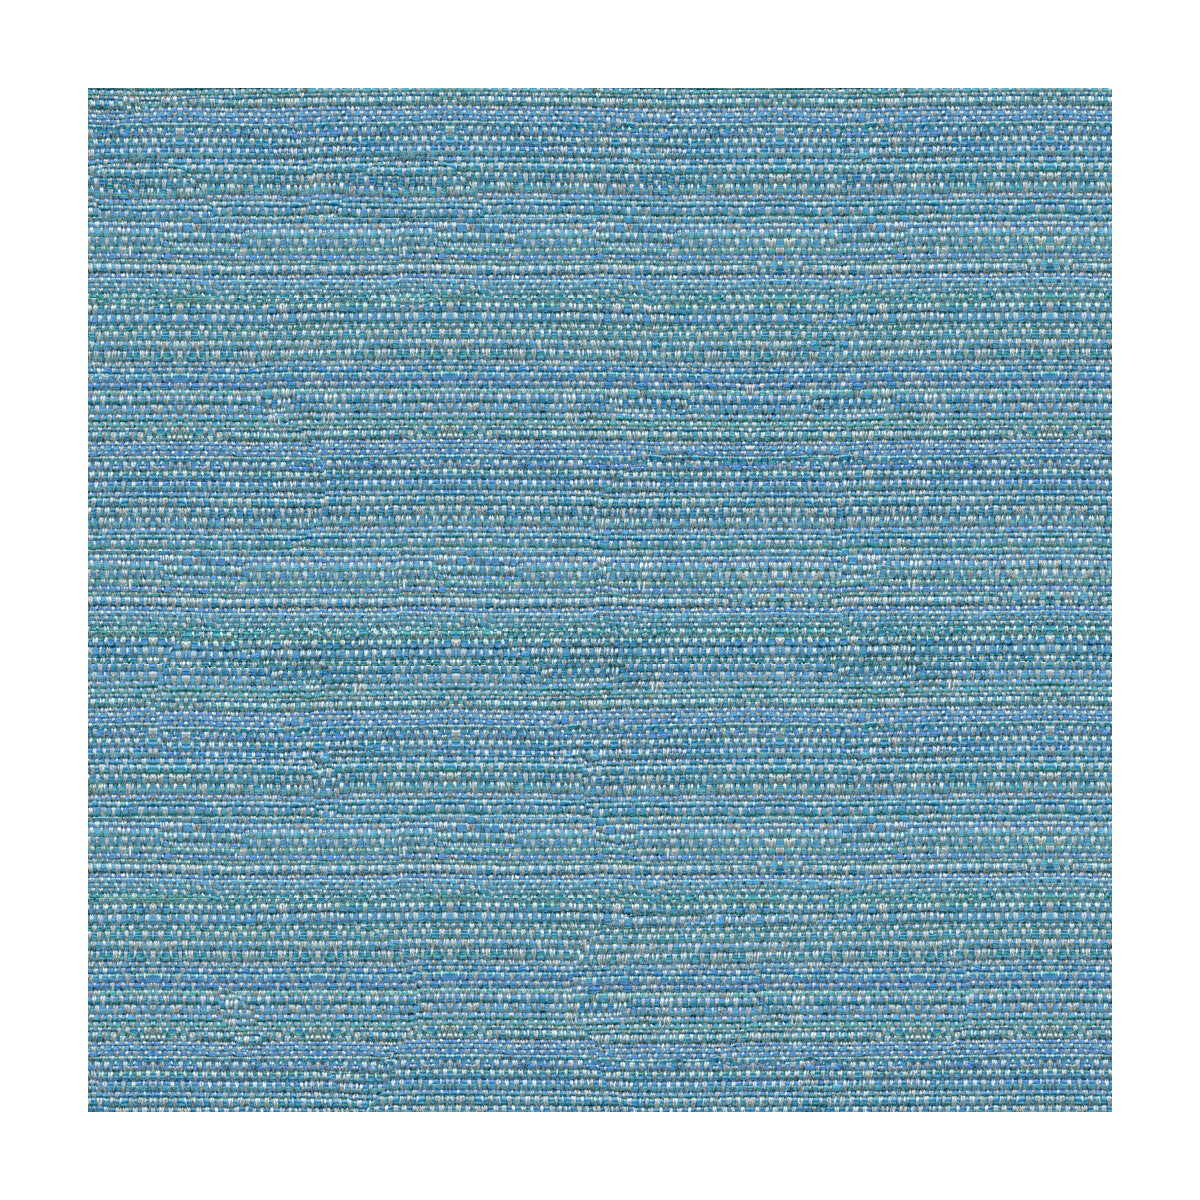 Kravet Couture fabric in 31695-313 color - pattern 31695.313.0 - by Kravet Couture